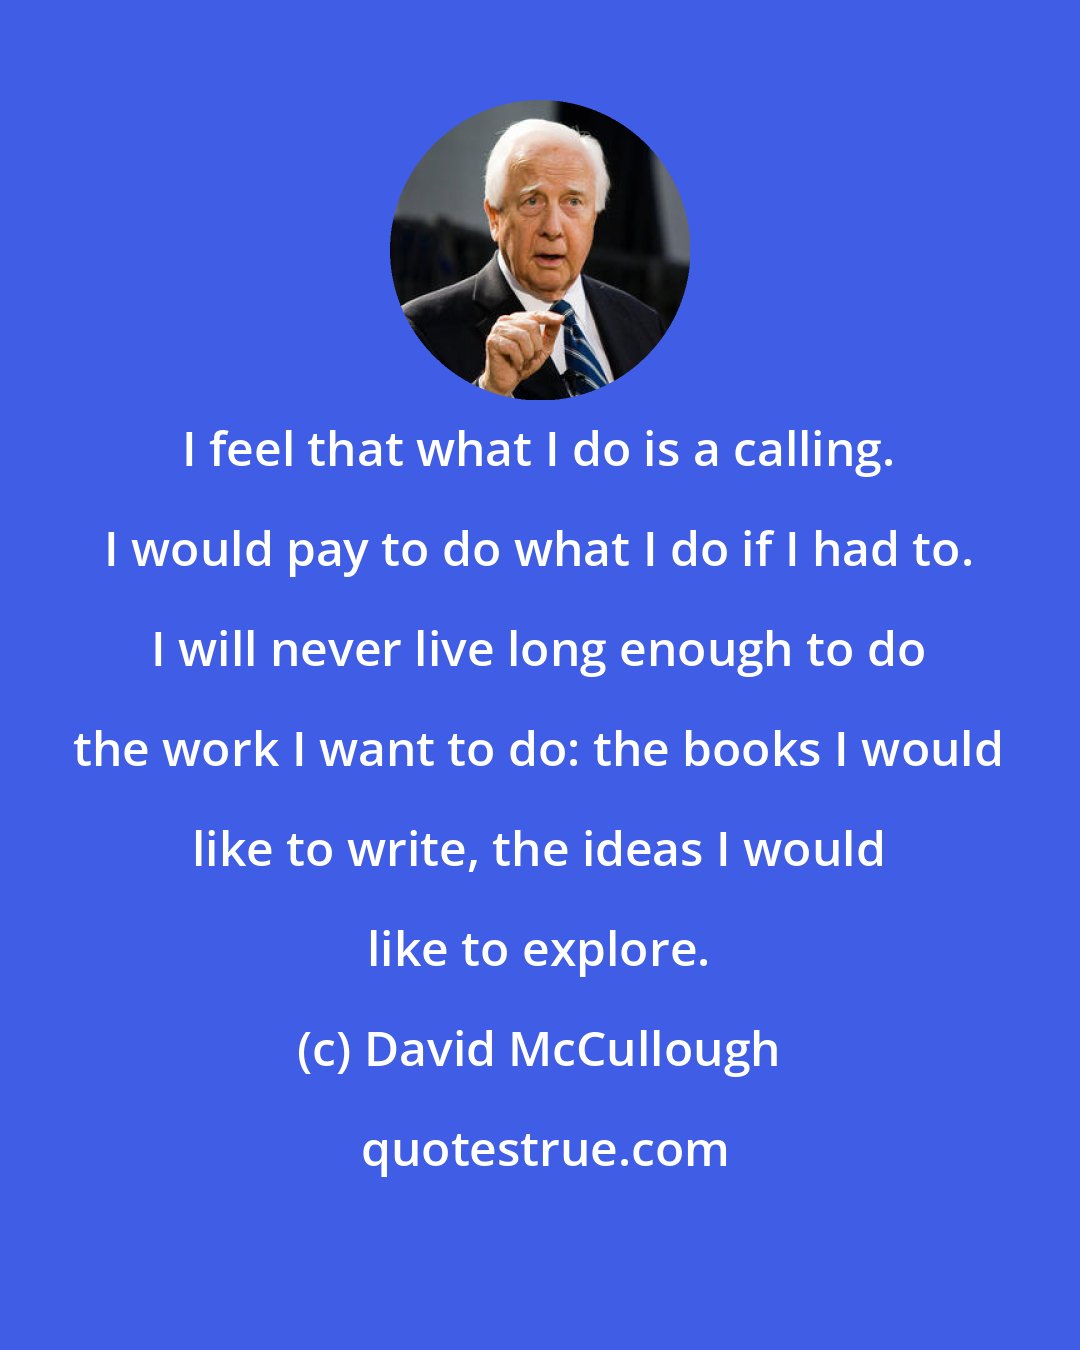 David McCullough: I feel that what I do is a calling. I would pay to do what I do if I had to. I will never live long enough to do the work I want to do: the books I would like to write, the ideas I would like to explore.